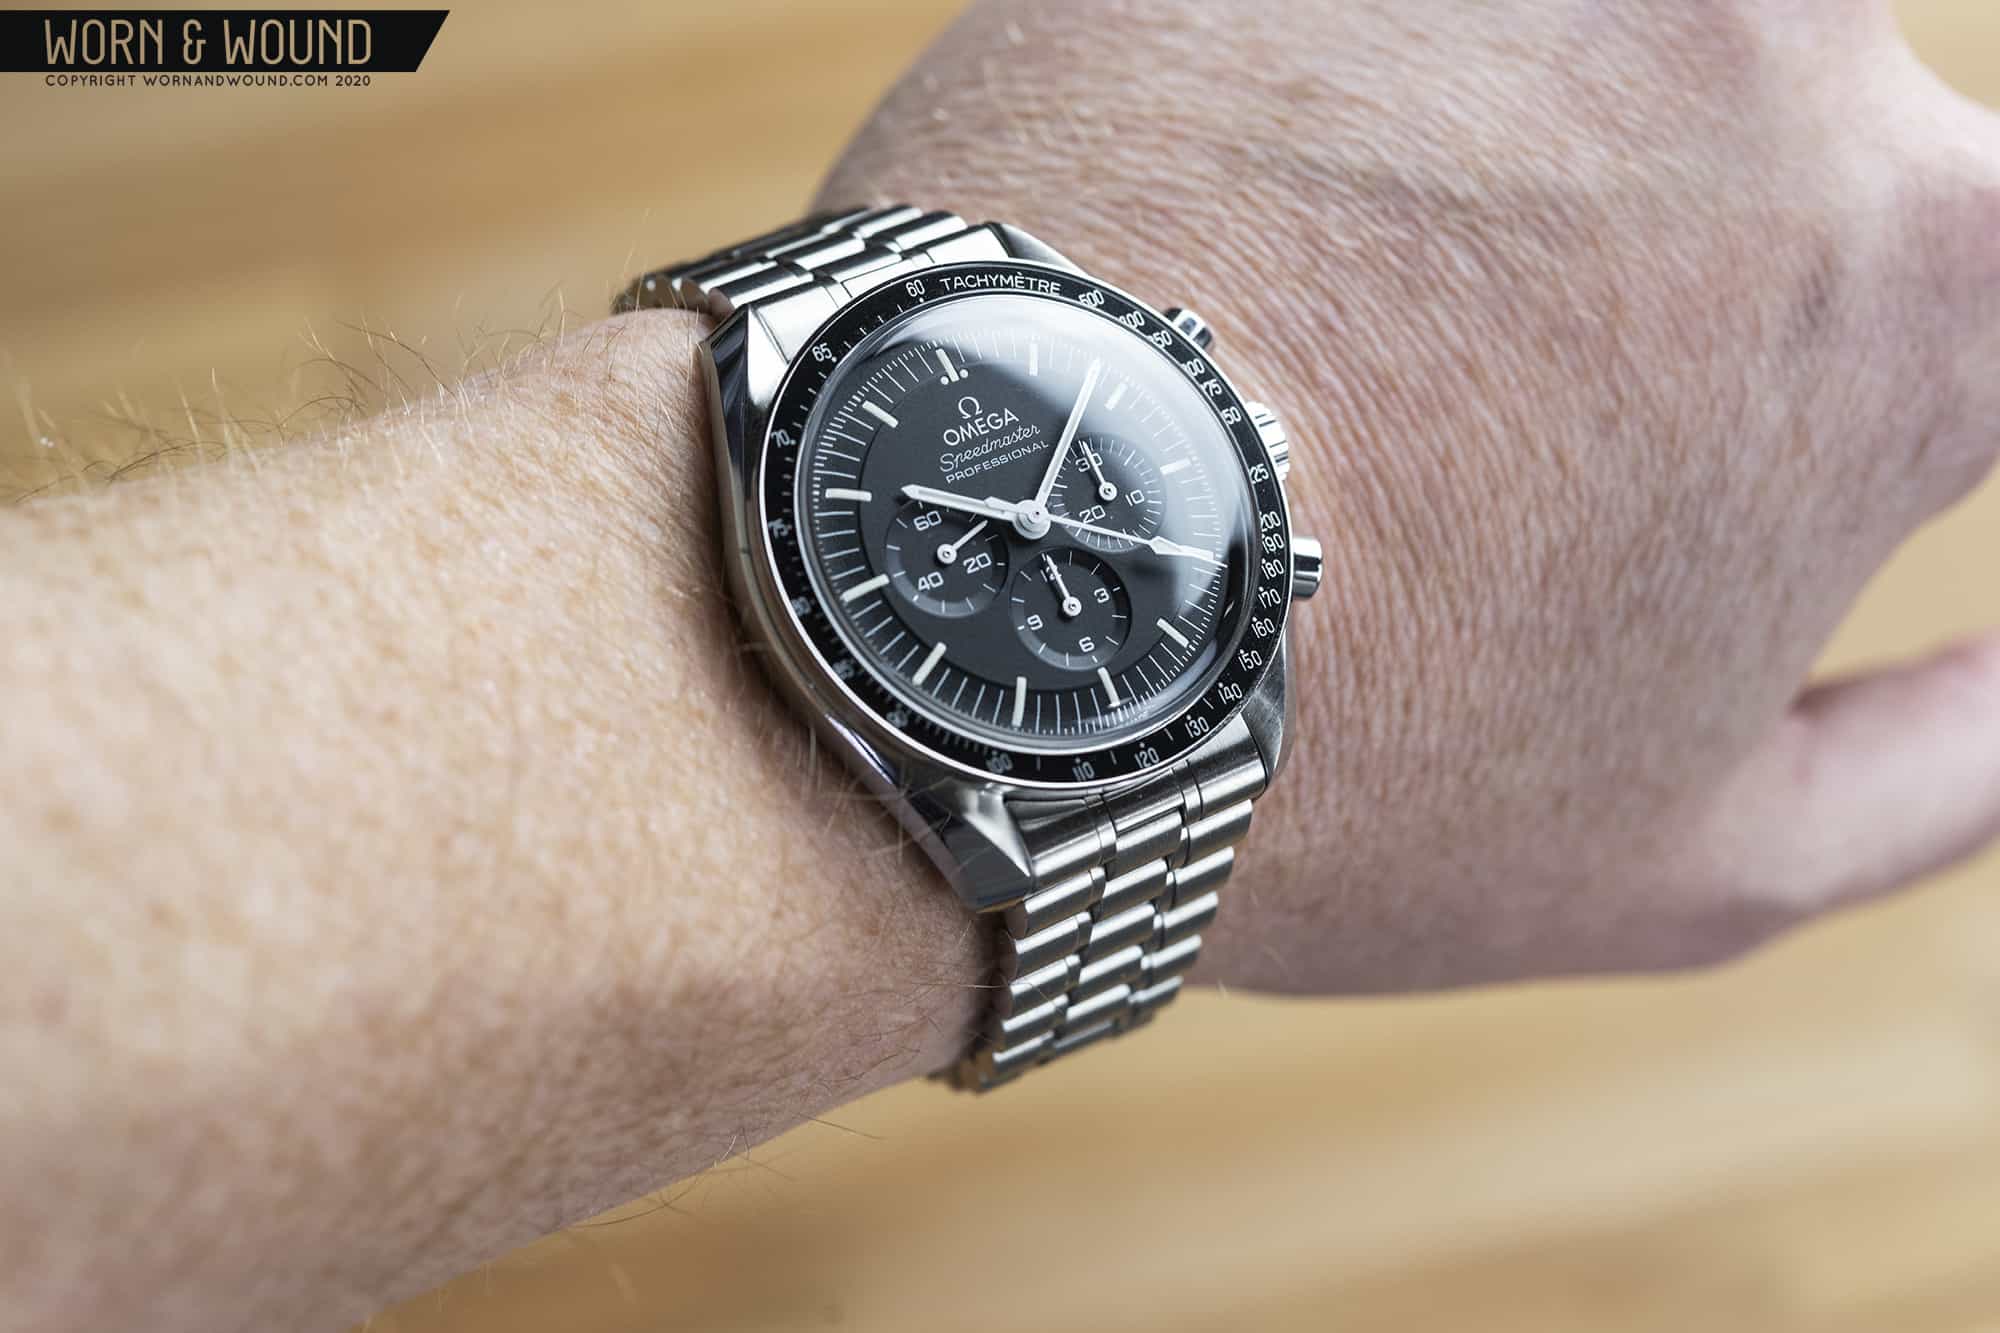 One Year Later With The Omega Speedmaster Moonwatch Professional 310.30.42.50.01.001